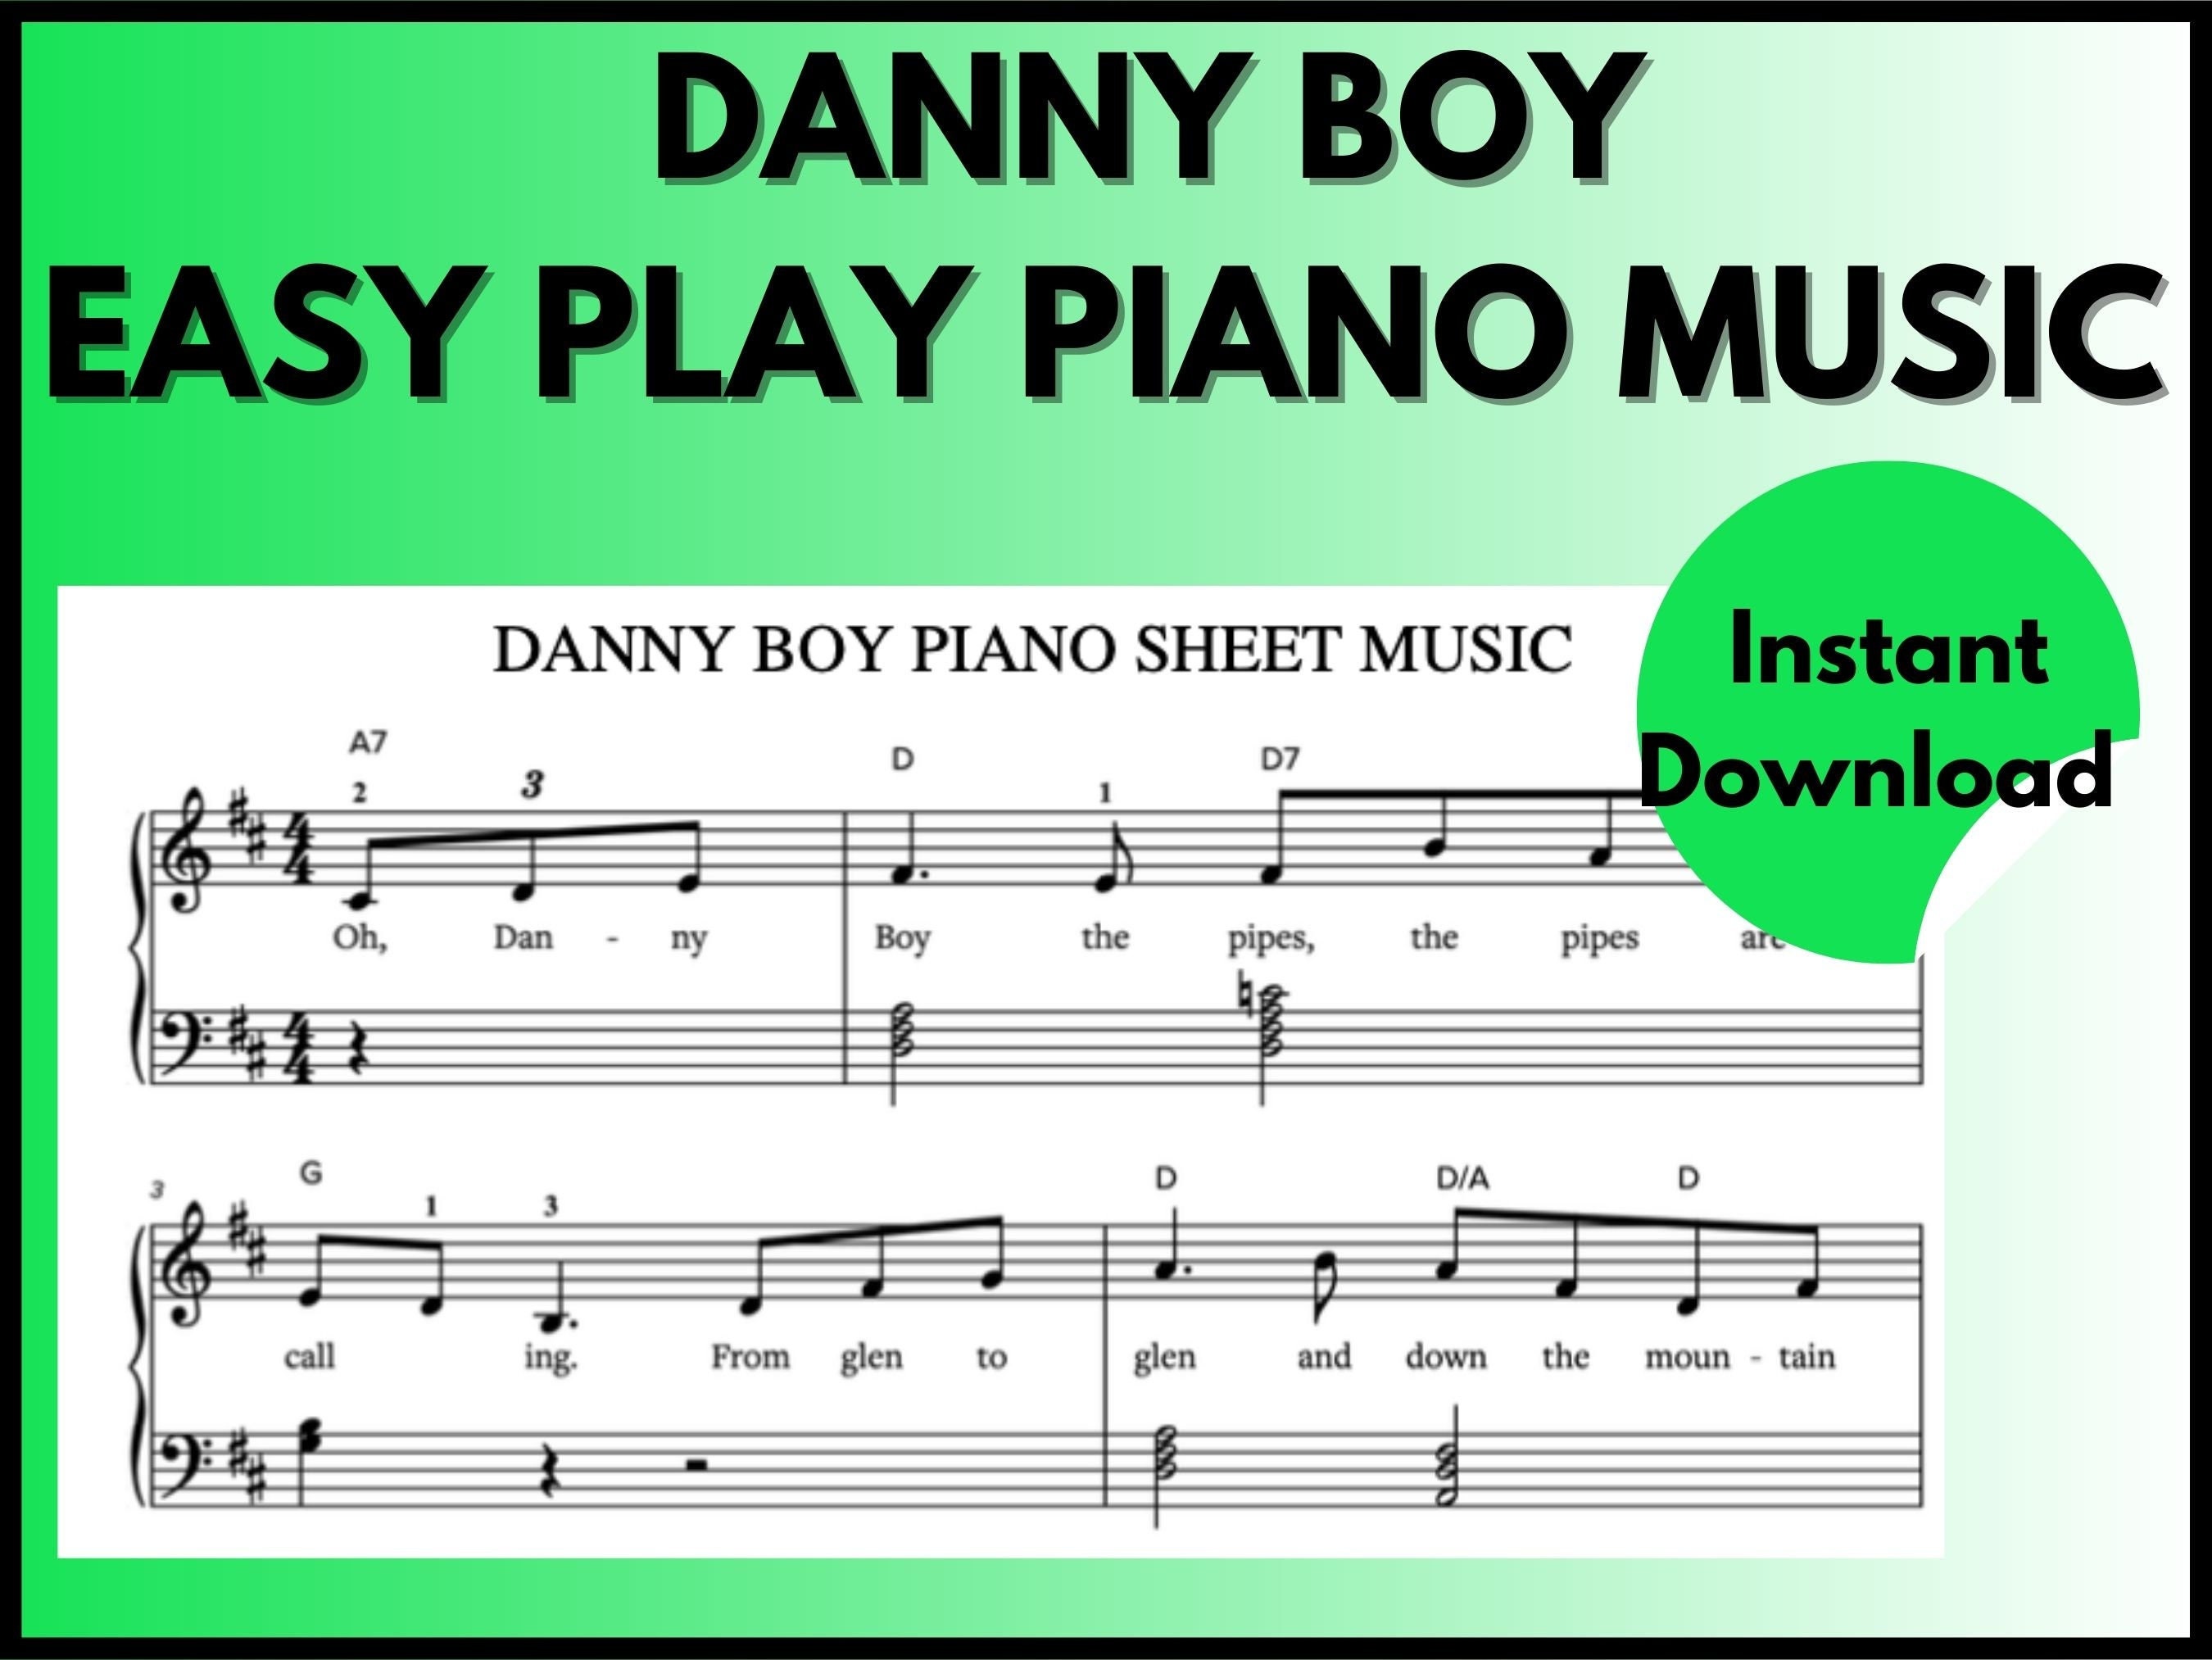 The Day Before You Came Sheet Music | Benny Andersson | Piano Solo